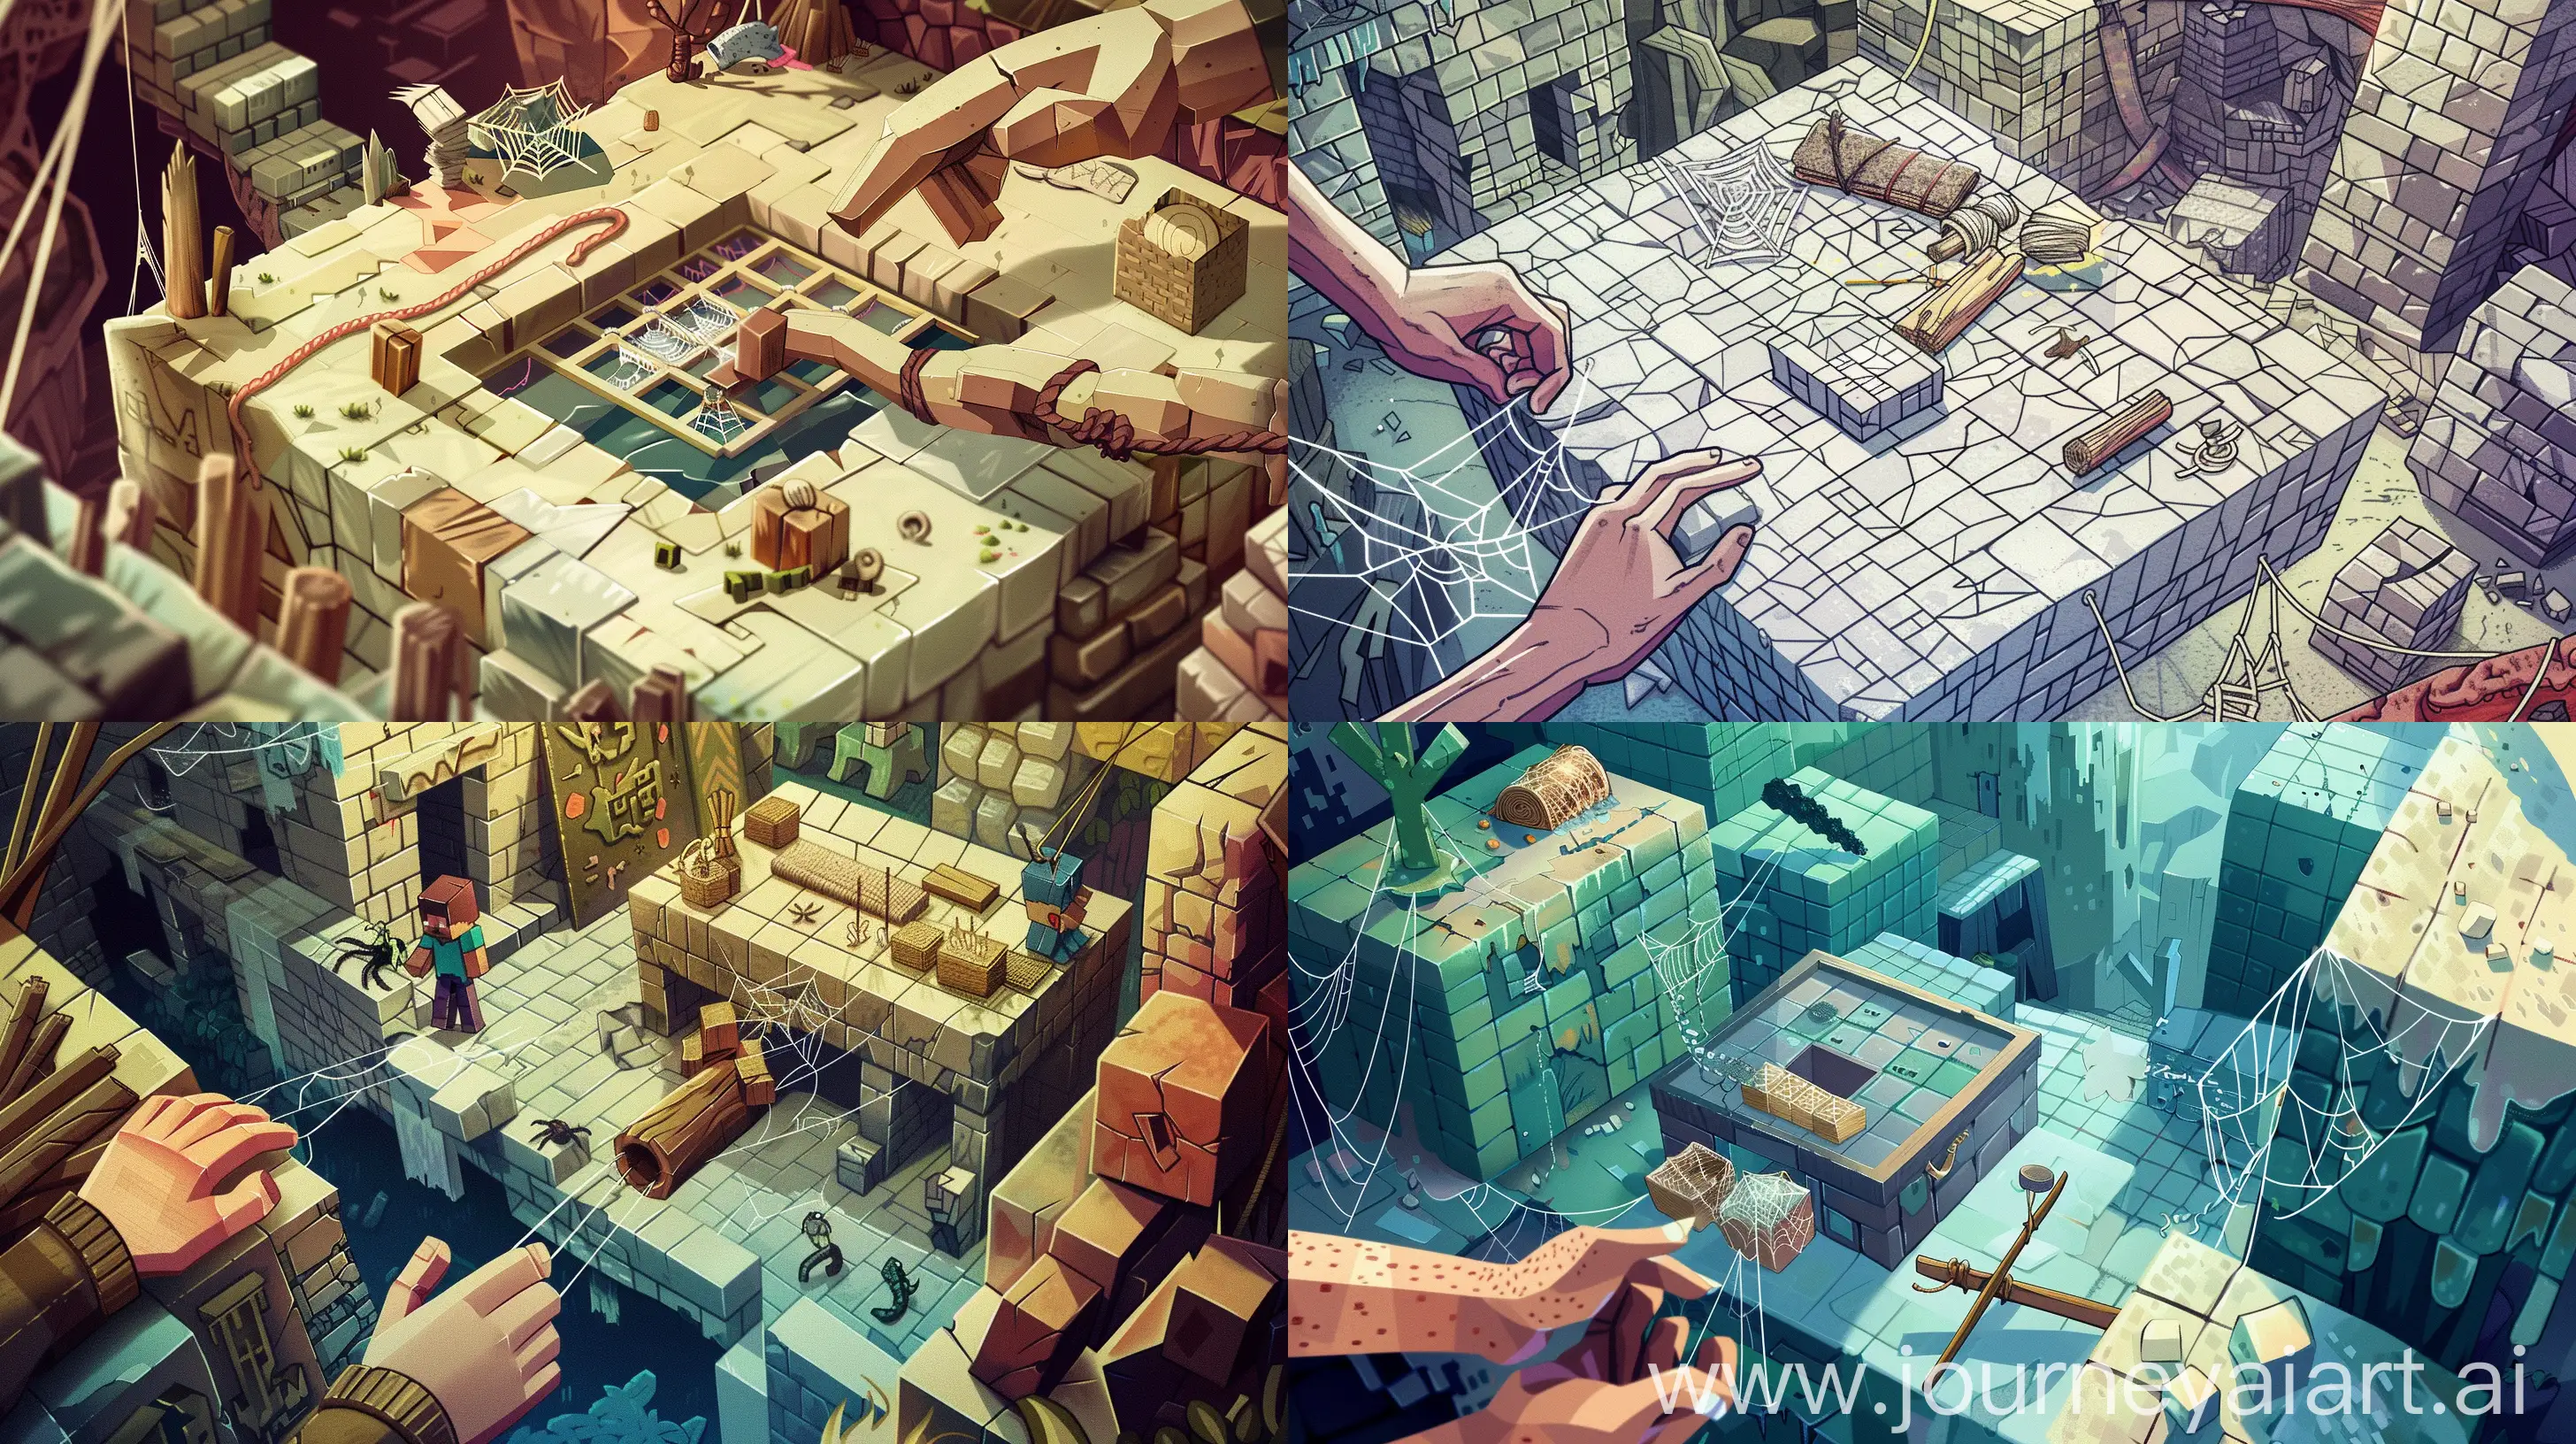 An intricate digital artwork portraying the step-by-step process of crafting a leash in a Minecraft-inspired setting. The illustration depicts a blocky, pixelated environment reminiscent of the game, with a crafting table as the focal point. In the foreground, a character's hands are shown gathering materials, including strings and sticks, representing the initial step of preparation. Next, the scene transitions to the character exploring caves, symbolizing the search for spider webs, a crucial component for crafting the leash. Finally, the crafting process unfolds at the table, where the character meticulously assembles the materials to create the leash. The illustration is rich in detail, capturing the essence of each step in the process without the need for text headings. --ar 16:9 